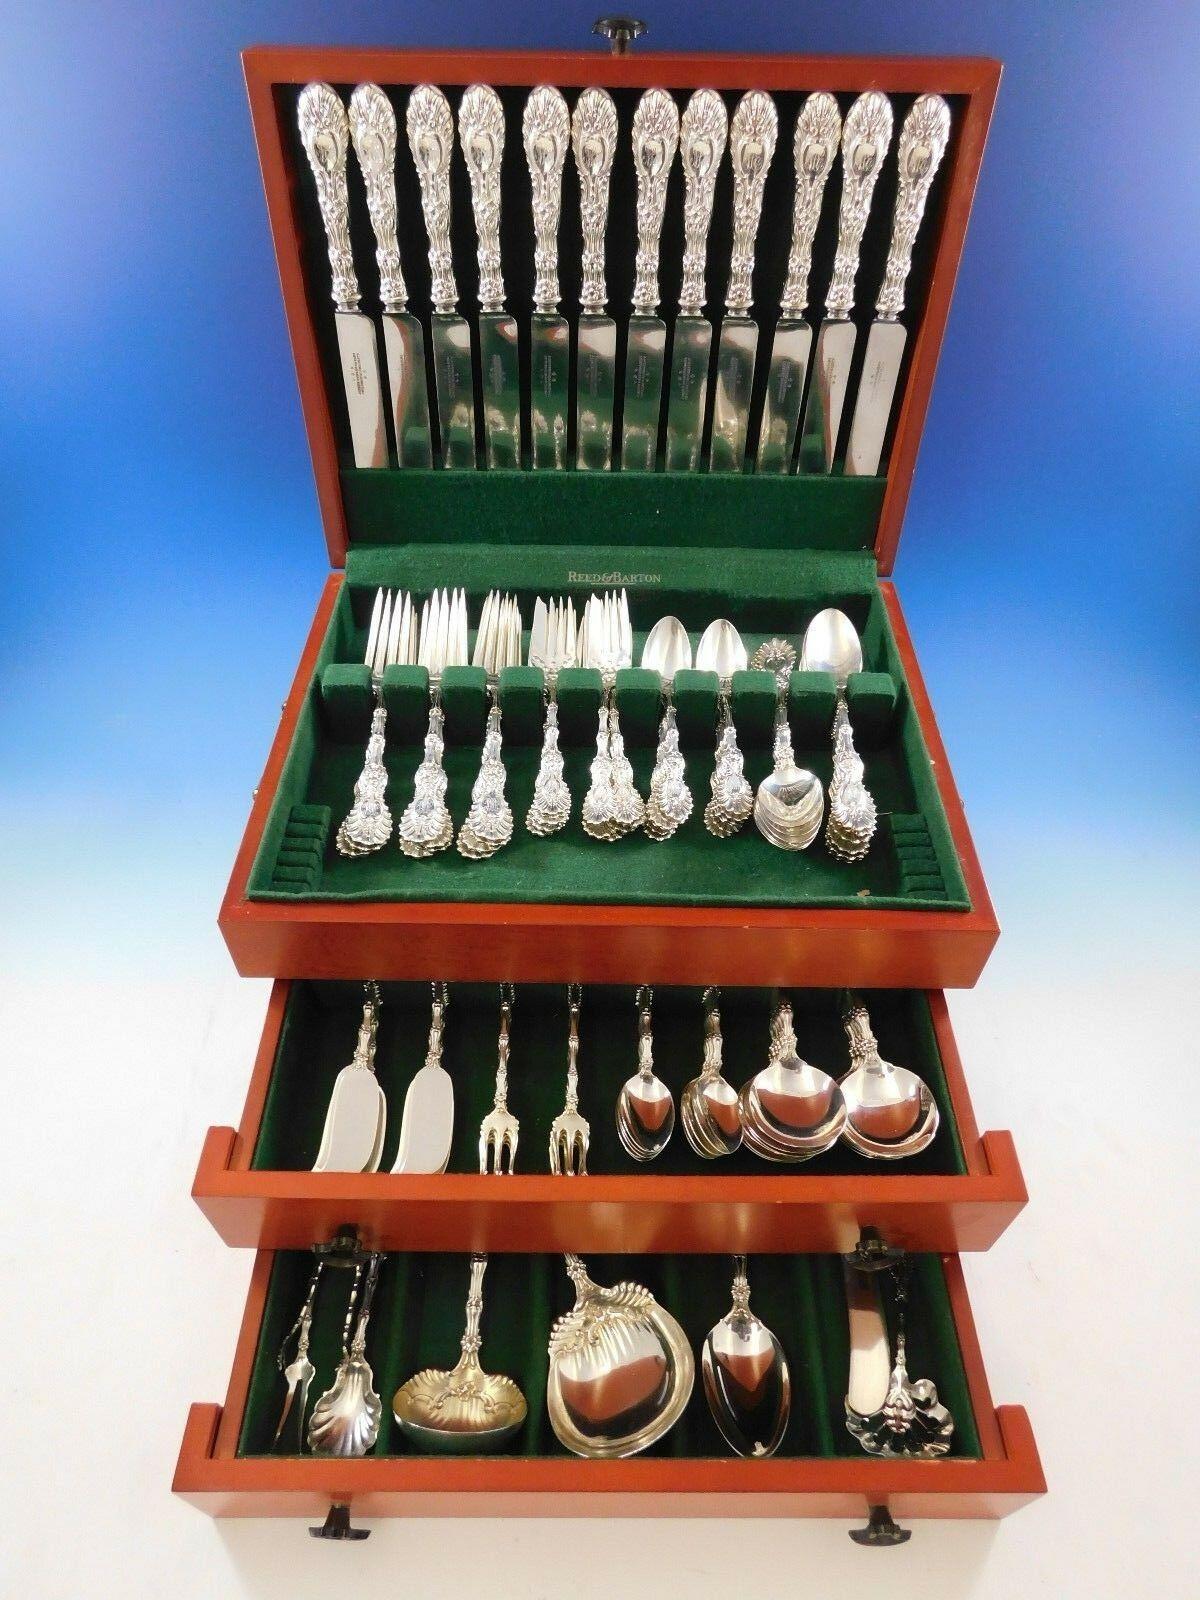 Impressive, dinner size, radiant by Whiting sterling silver flatware set - 116 Pieces. This set includes:

12 banquet knives, 10 1/2